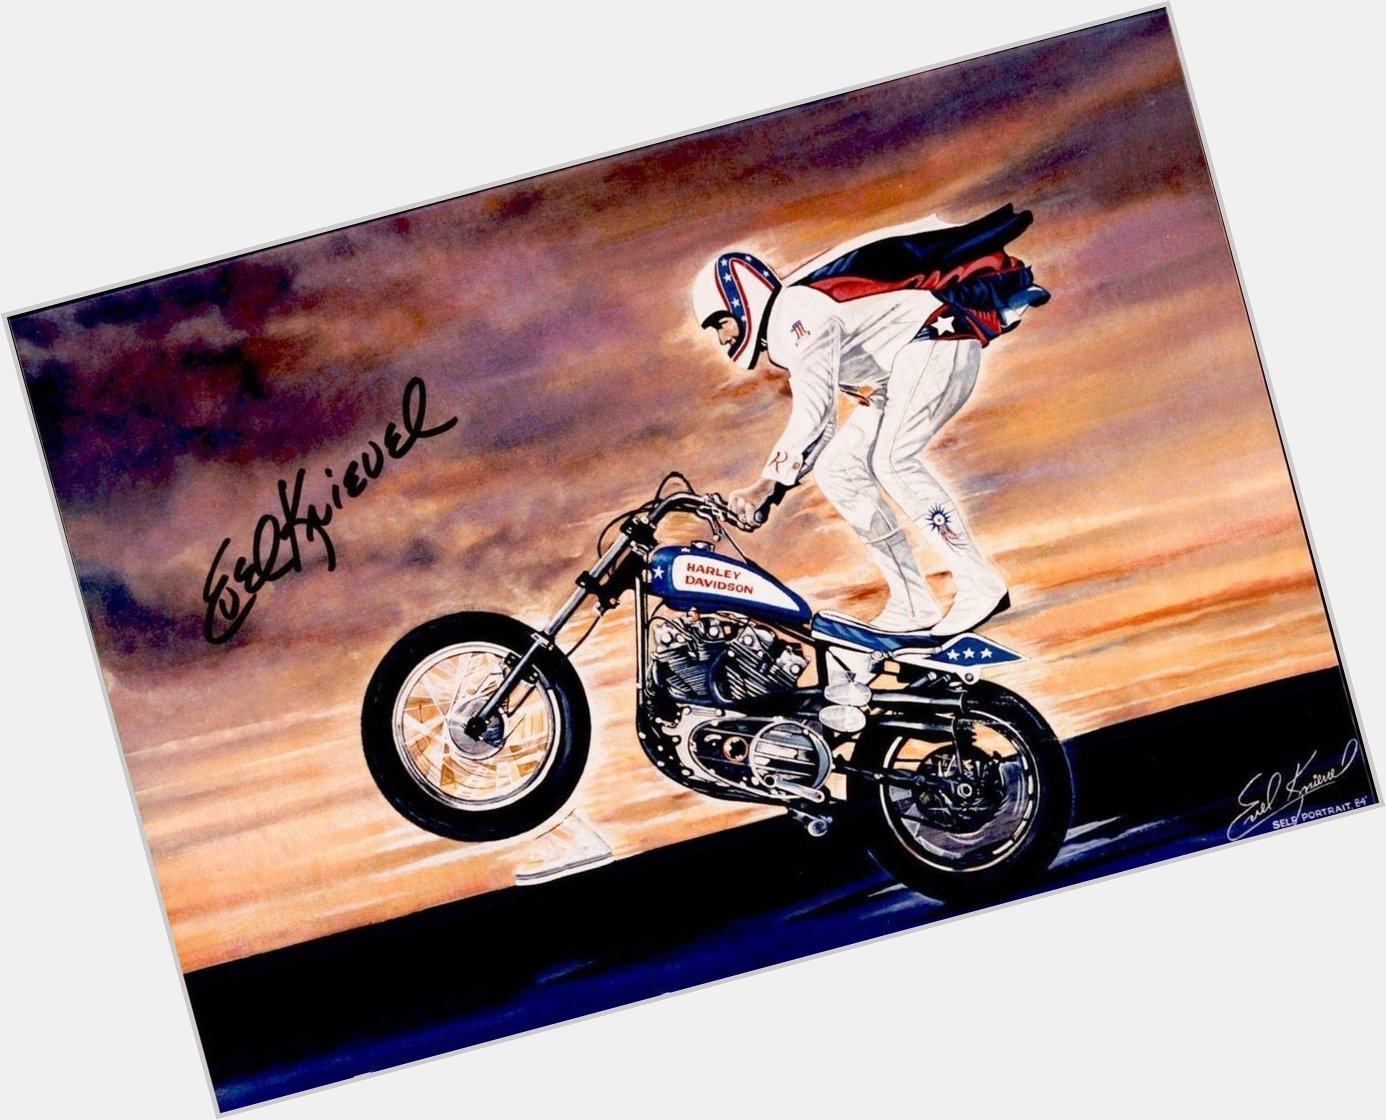 The Man, the myth, the legend..
Evel would have been 83 today.
Happy Birthday Evel Knievel October 17, 1938. 